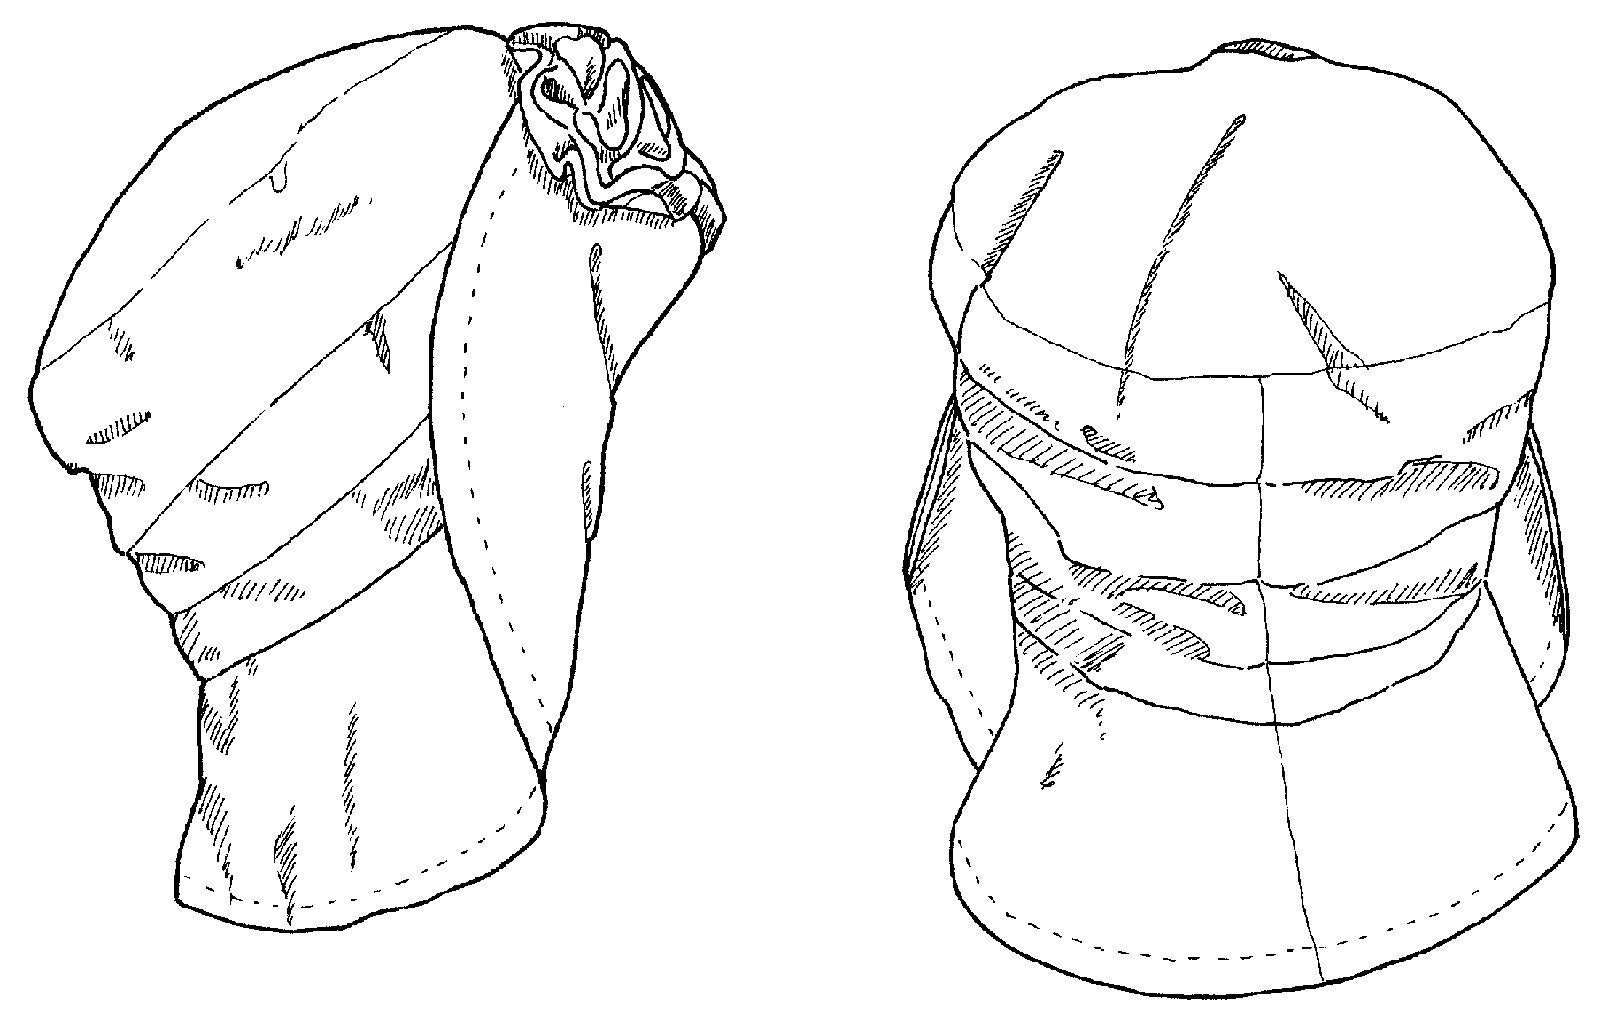 Black and white pattern drawing of the side and back view of the Metropolitan Hat.